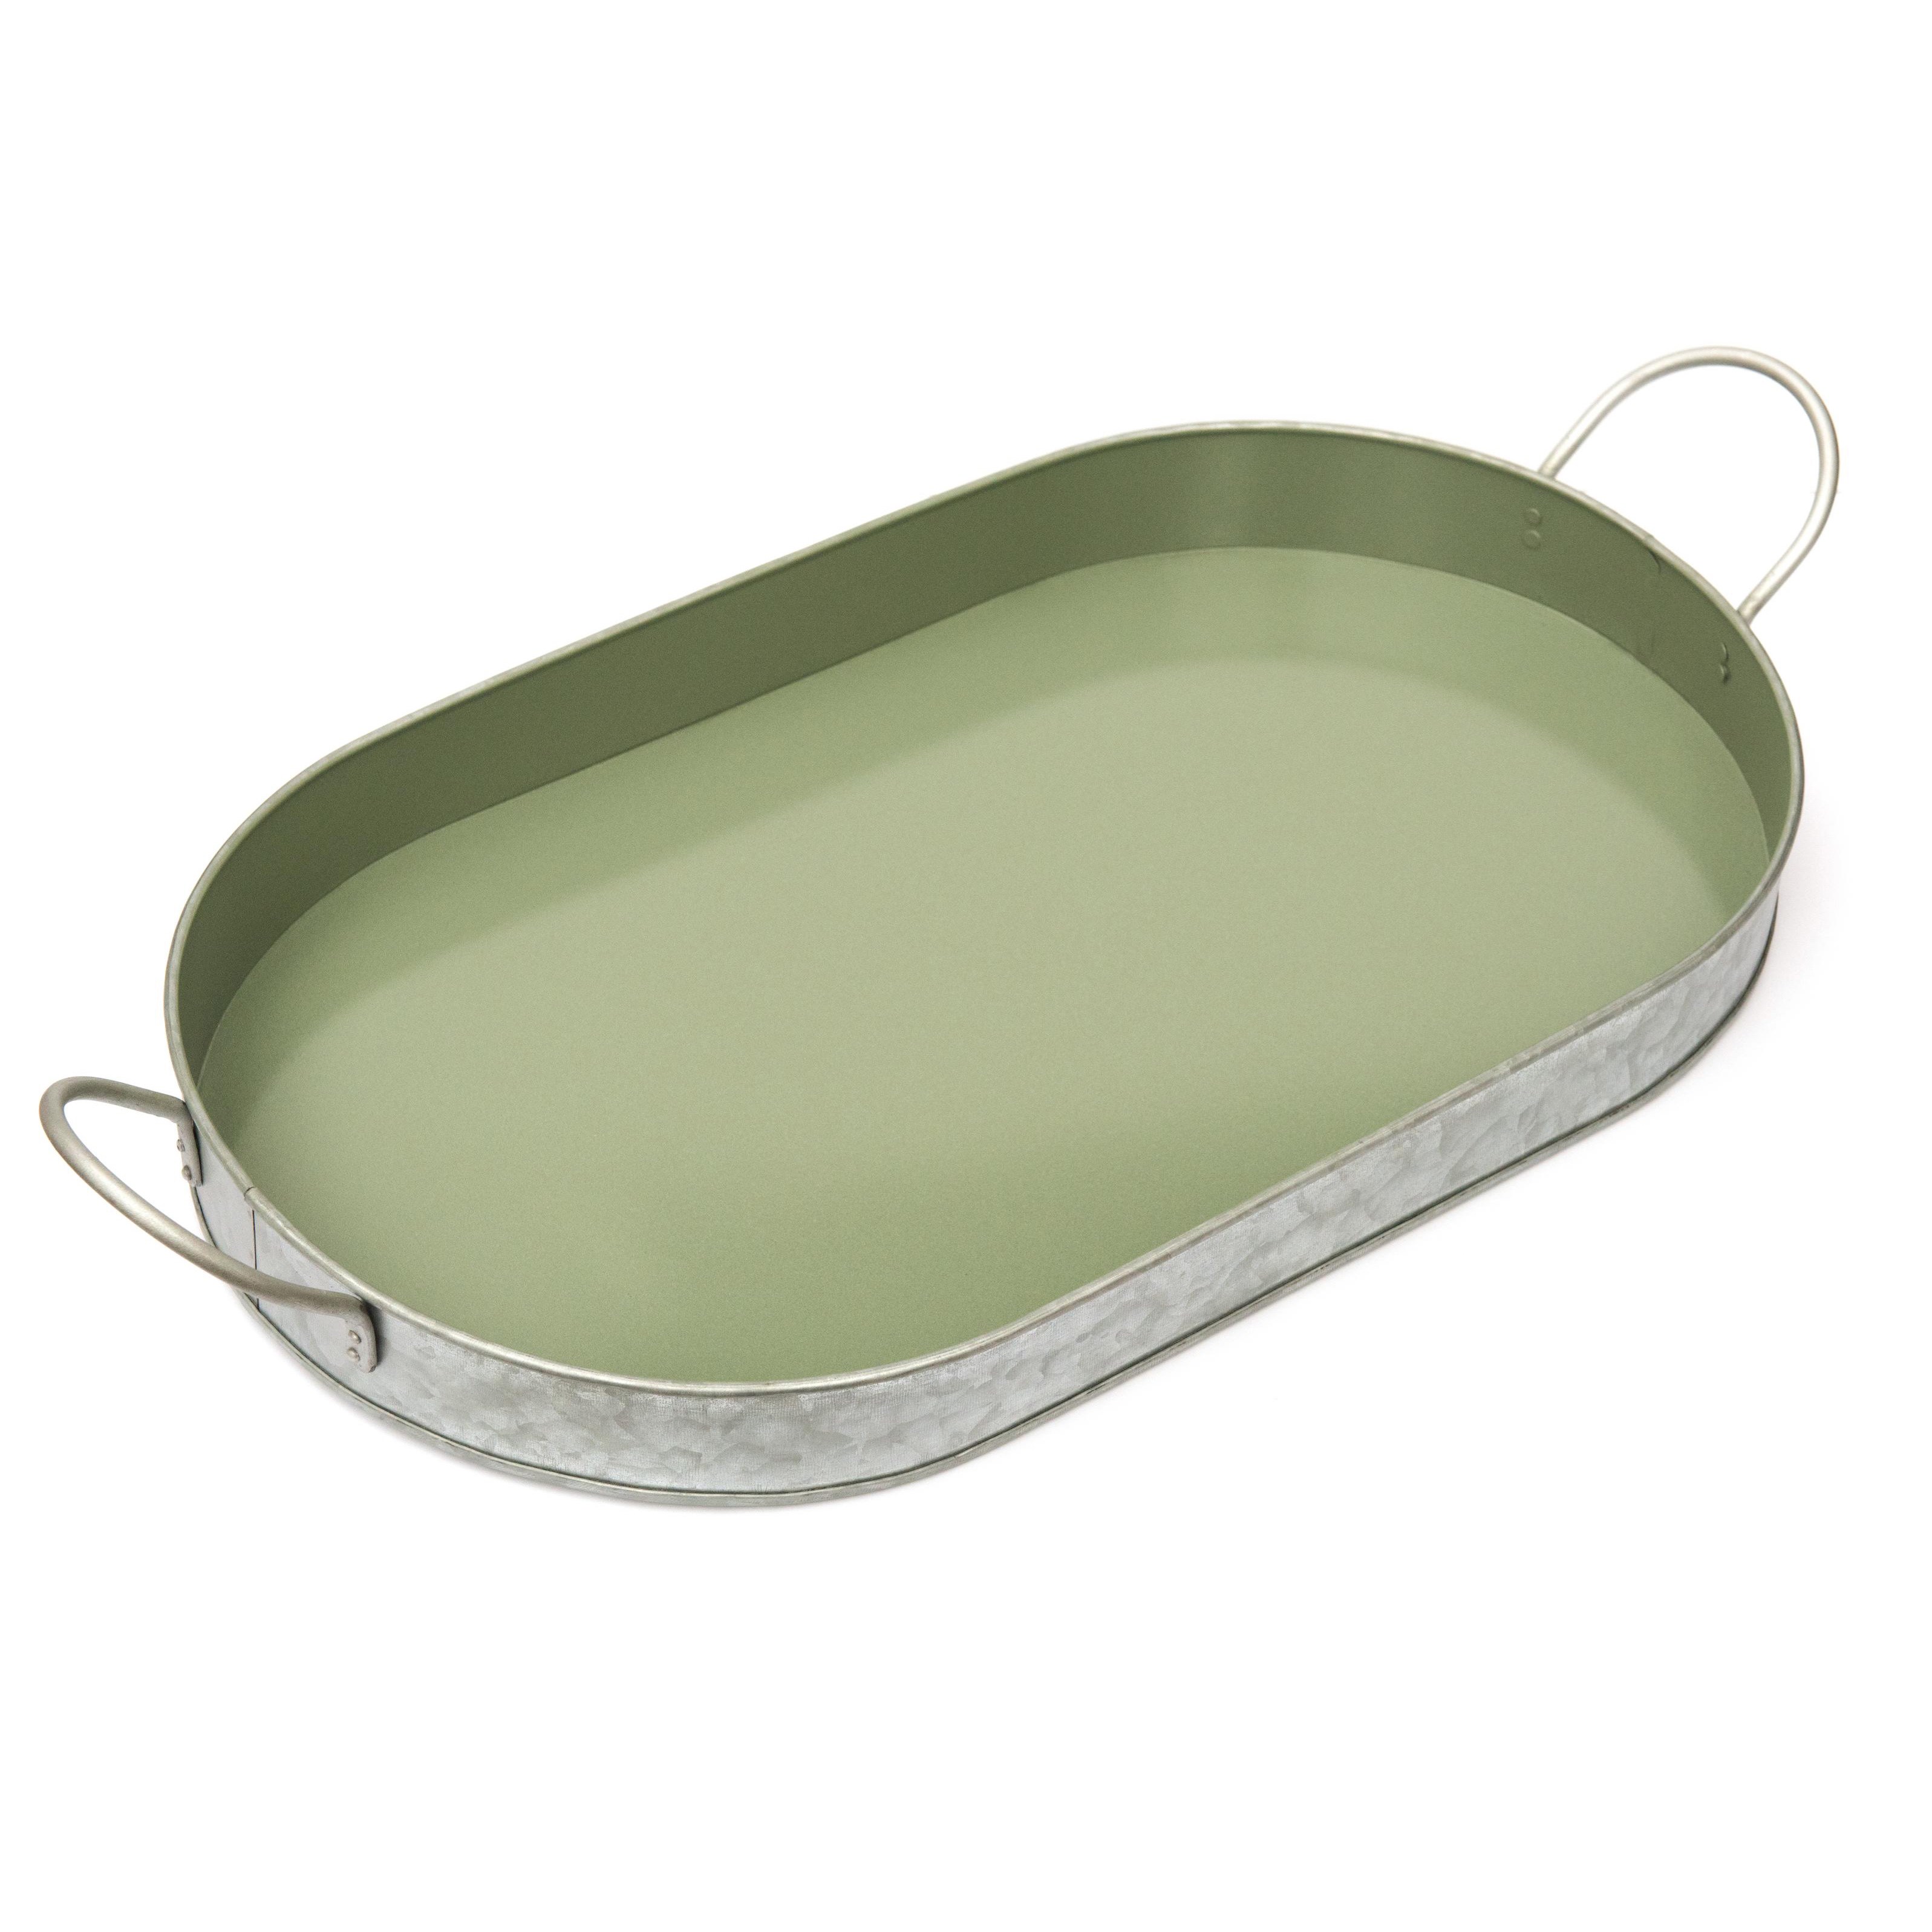 Galvanised oval serving tray